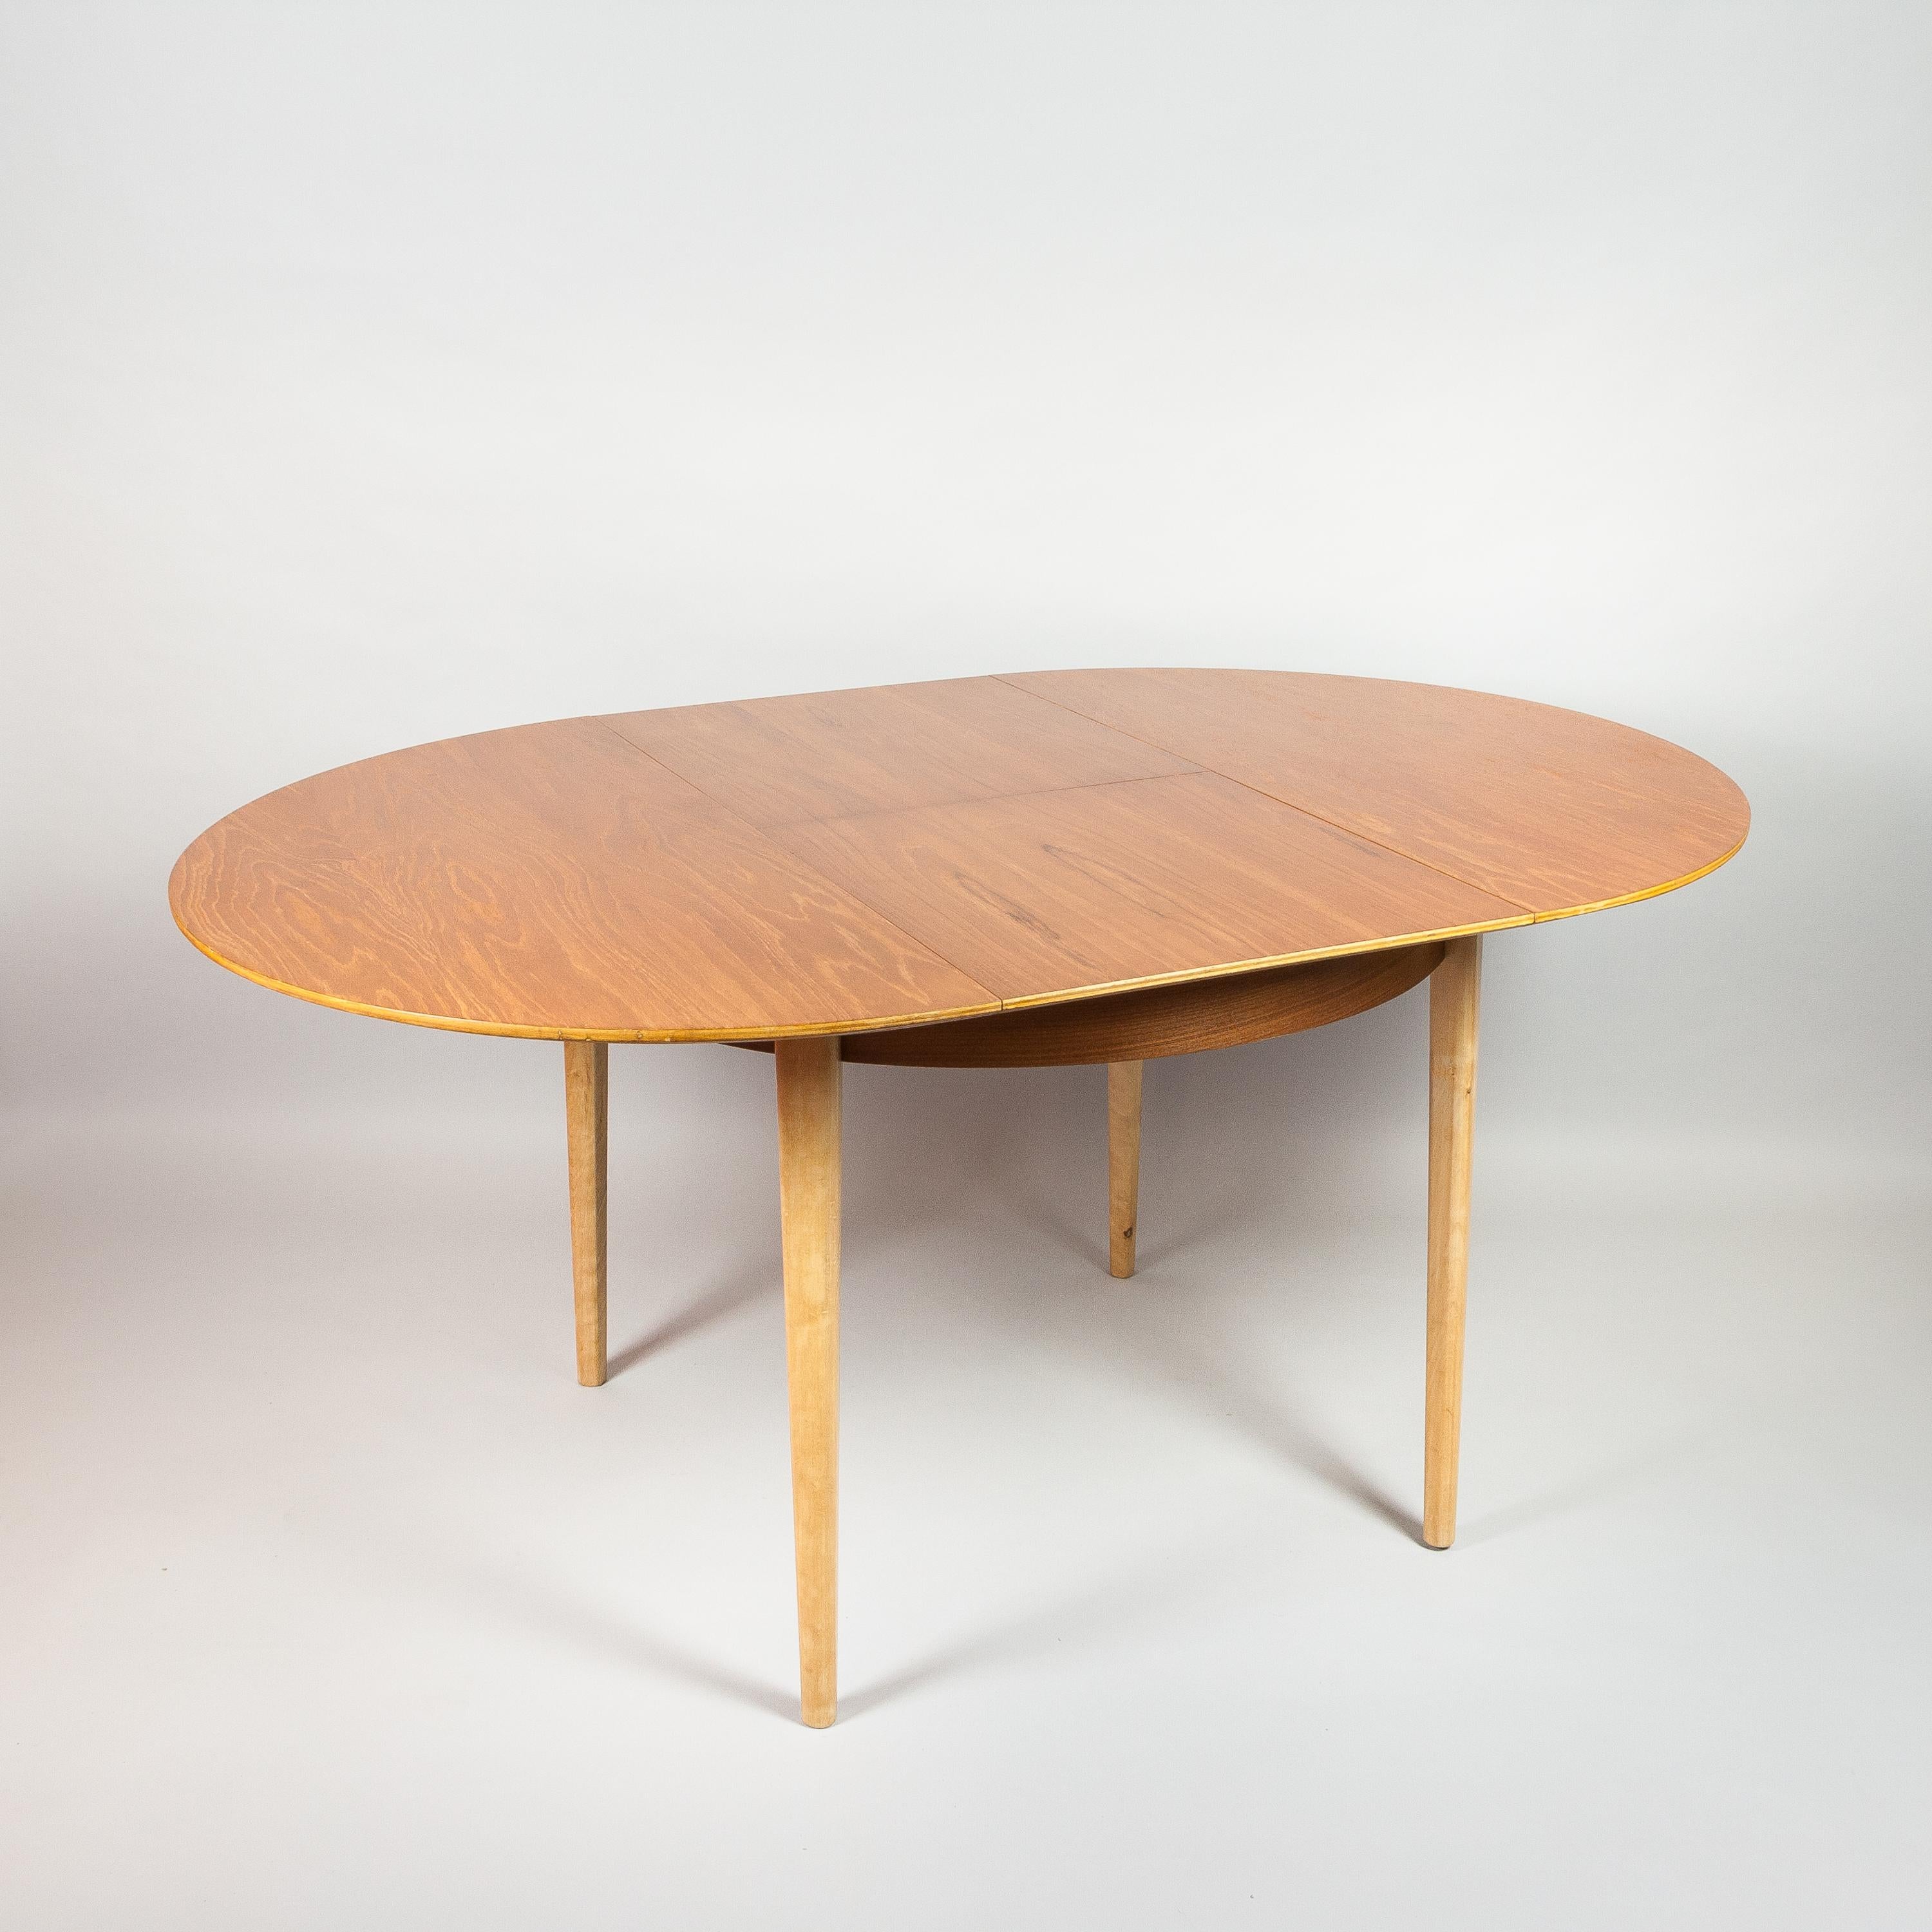 Dutch Model TB05 Teak and Maple Dining Table by Cees Braakman for Pastoe, 1950s